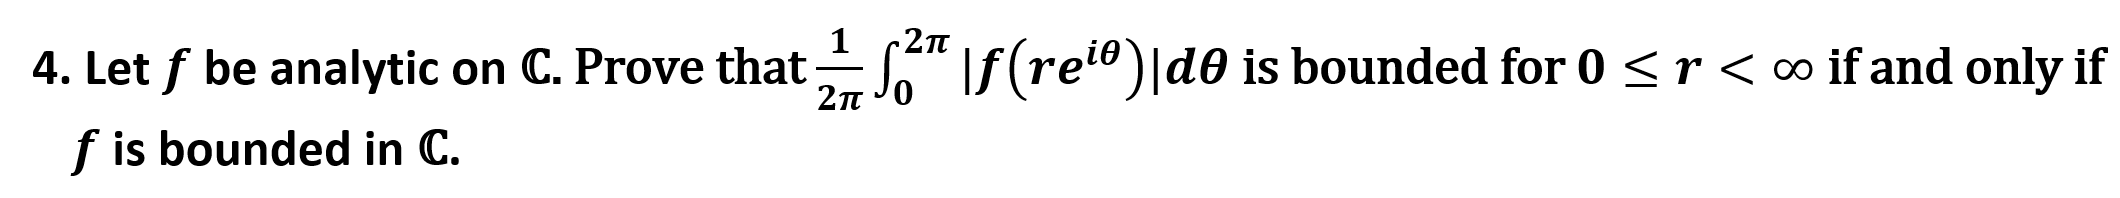 1
4. Let f be analytic on C. Prove that -
2n J0
\f(ret®)|d0 is bounded for 0 <r<∞ if and only if
f is bounded in C.
